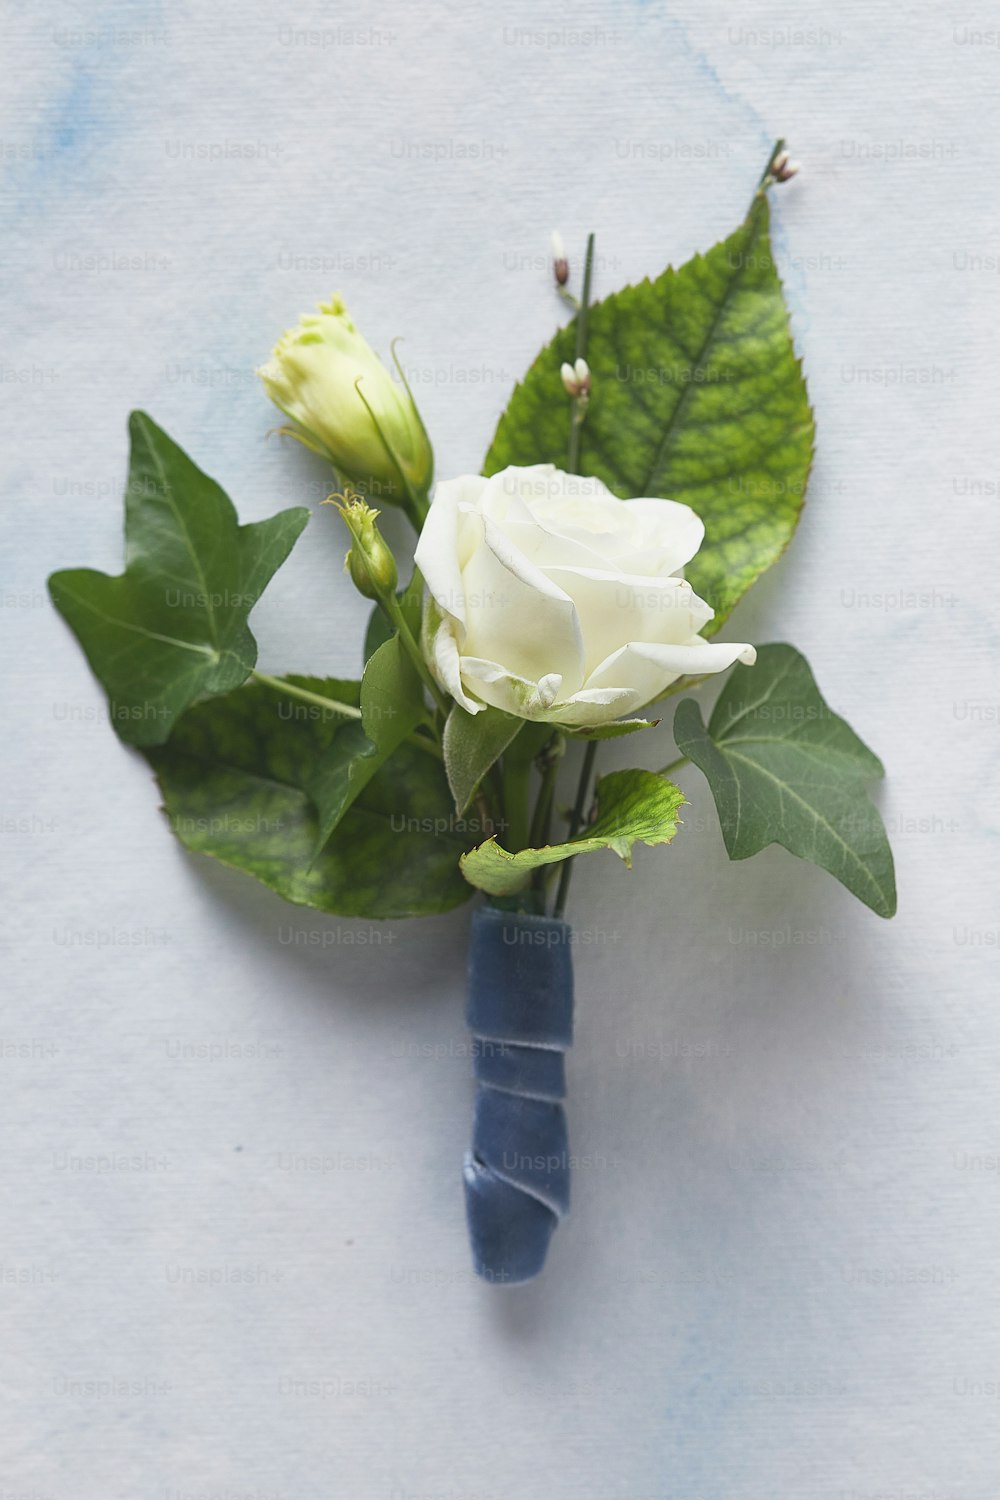 a white rose and green leaves on a blue vase